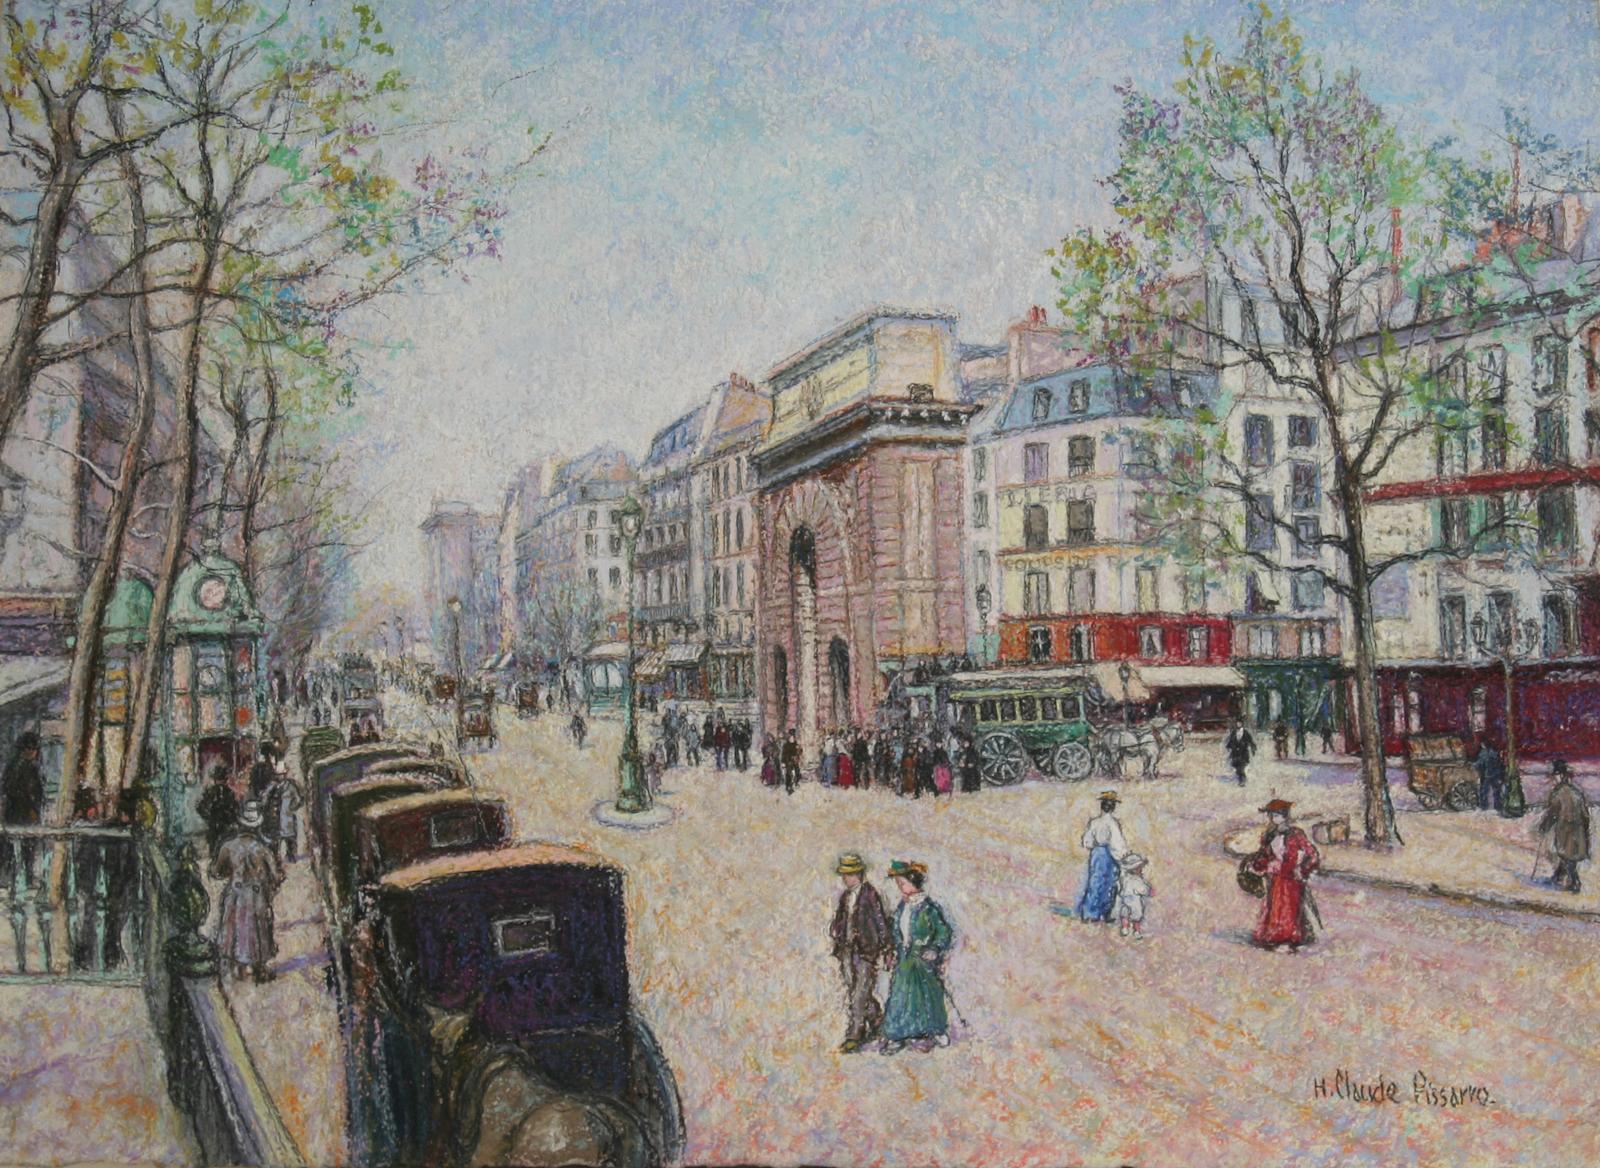 *UK BUYERS WILL PAY AN ADDITIONAL 20% VAT ON TOP OF THE ABOVE PRICE

Paris - Porte Saint Martin by H. Claude Pissarro (b. 1935)
Pastel on card
37 x 51 cm (14 ⁵/₈ x 20 ¹/₈ inches)
Signed lower right, H. Claude Pissarro

This work is accompanied by a